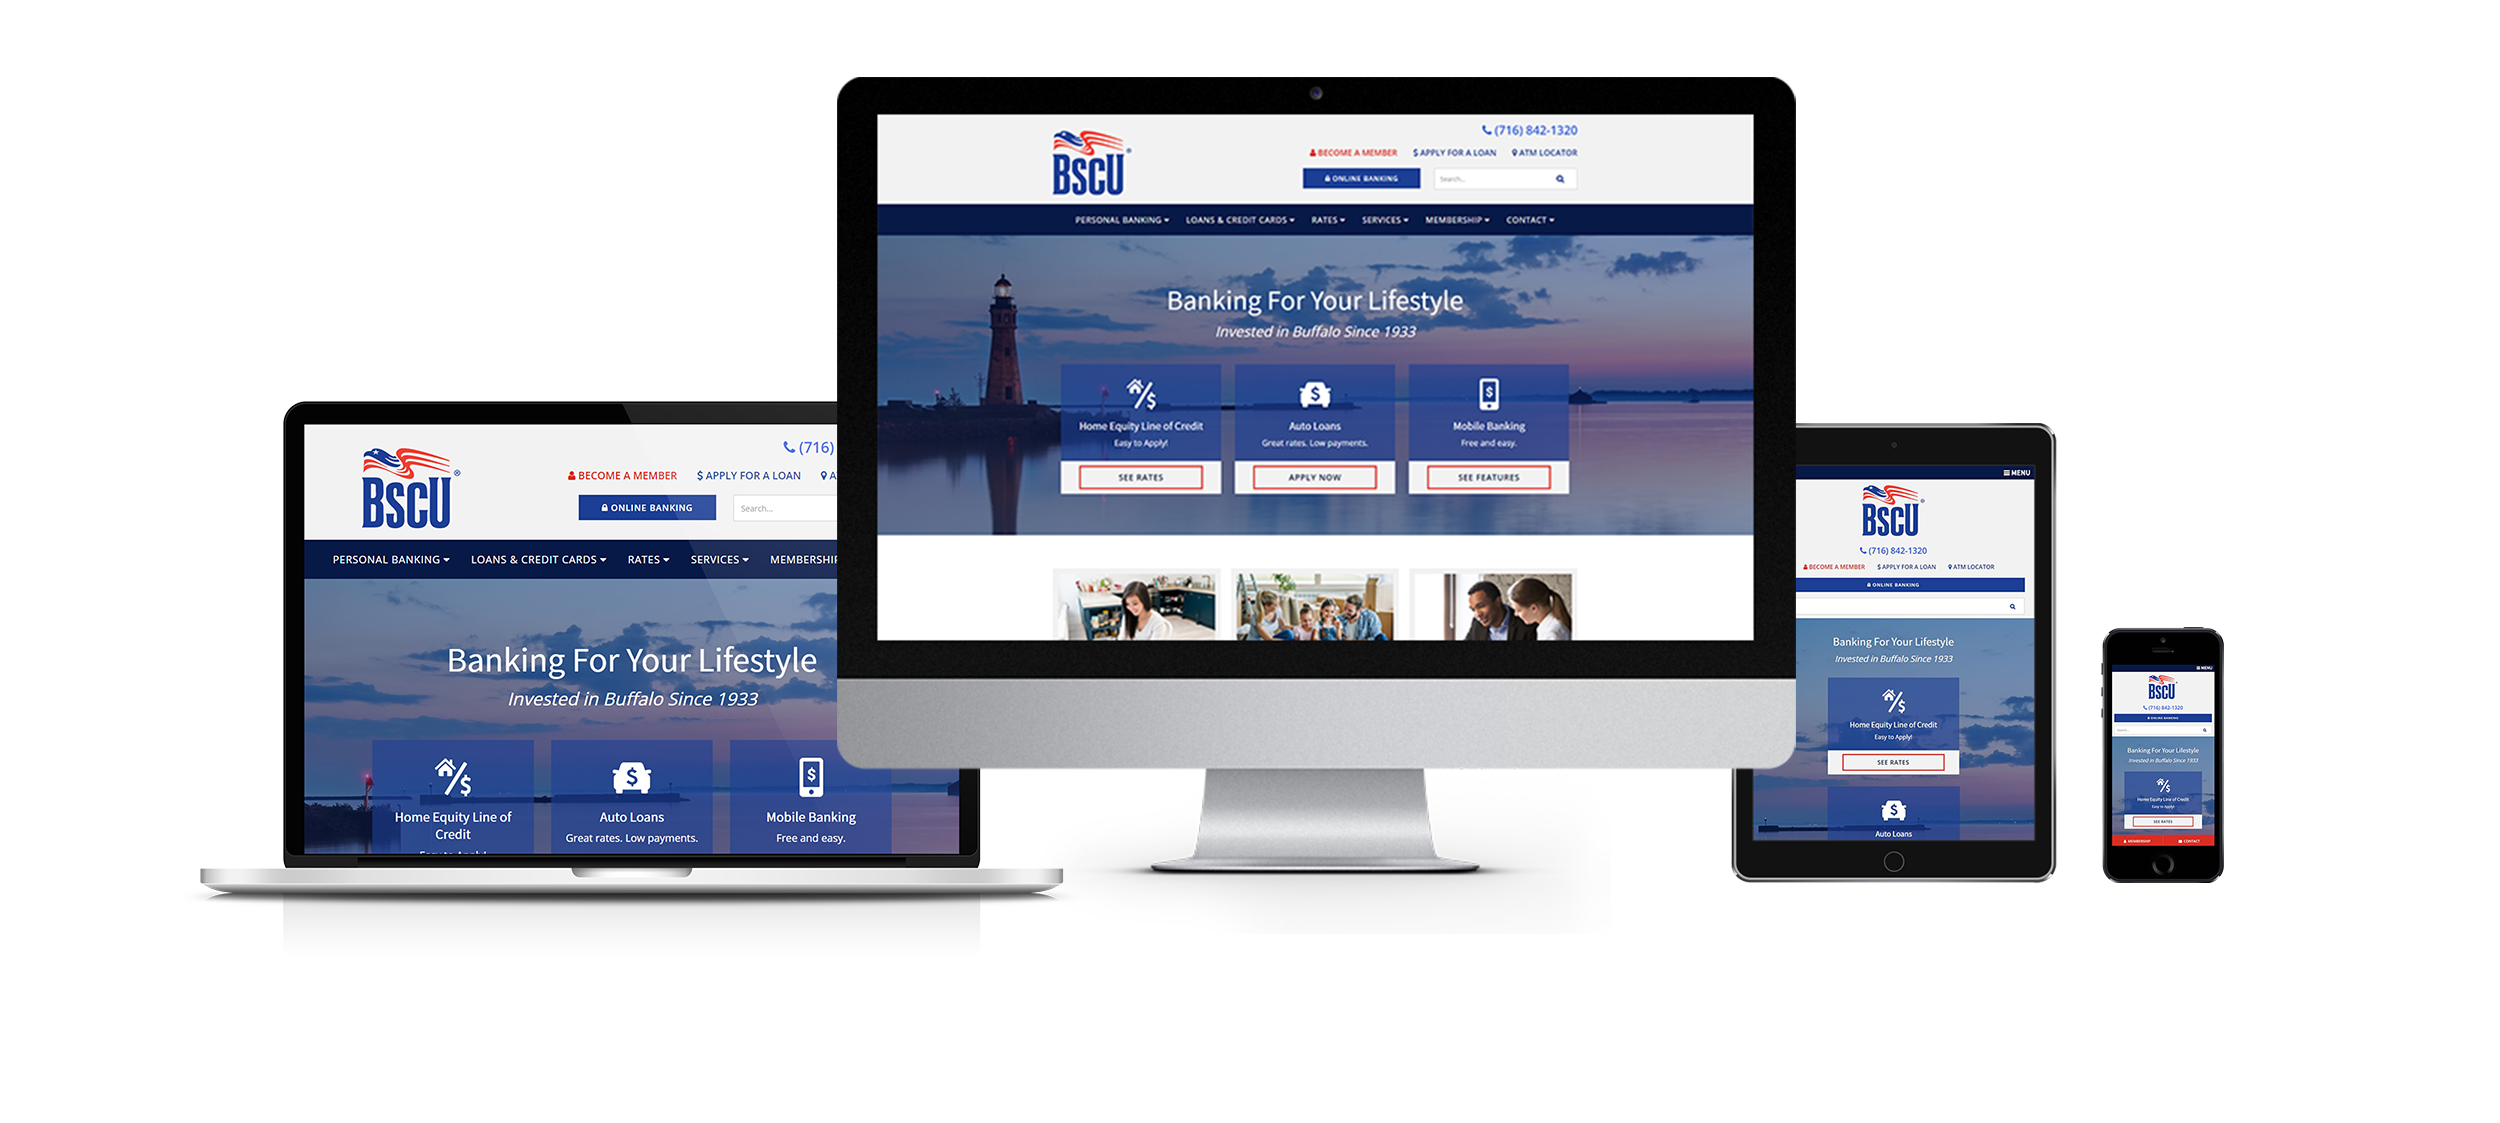 credit union website design near buffalo ny responsive website design for bscu by acs web design and seo